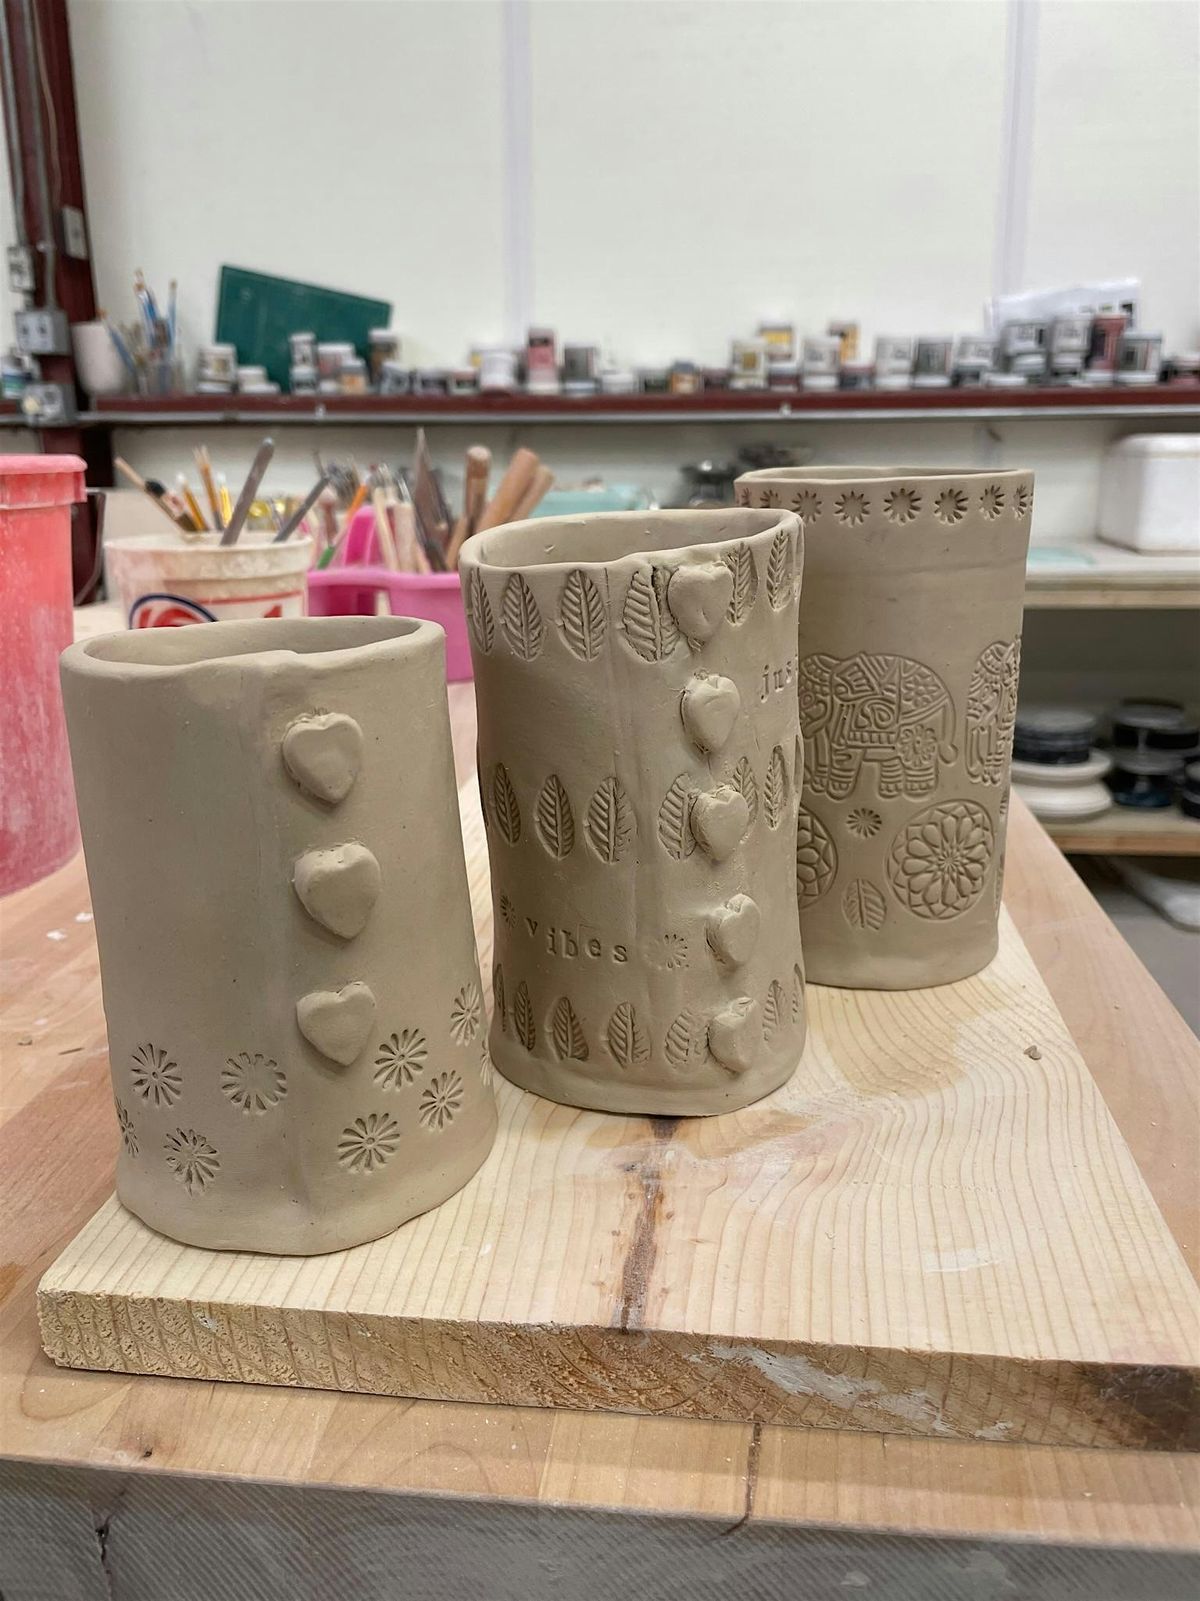 Intro to Hand Building and Sculpture (Single Session Pottery Class)